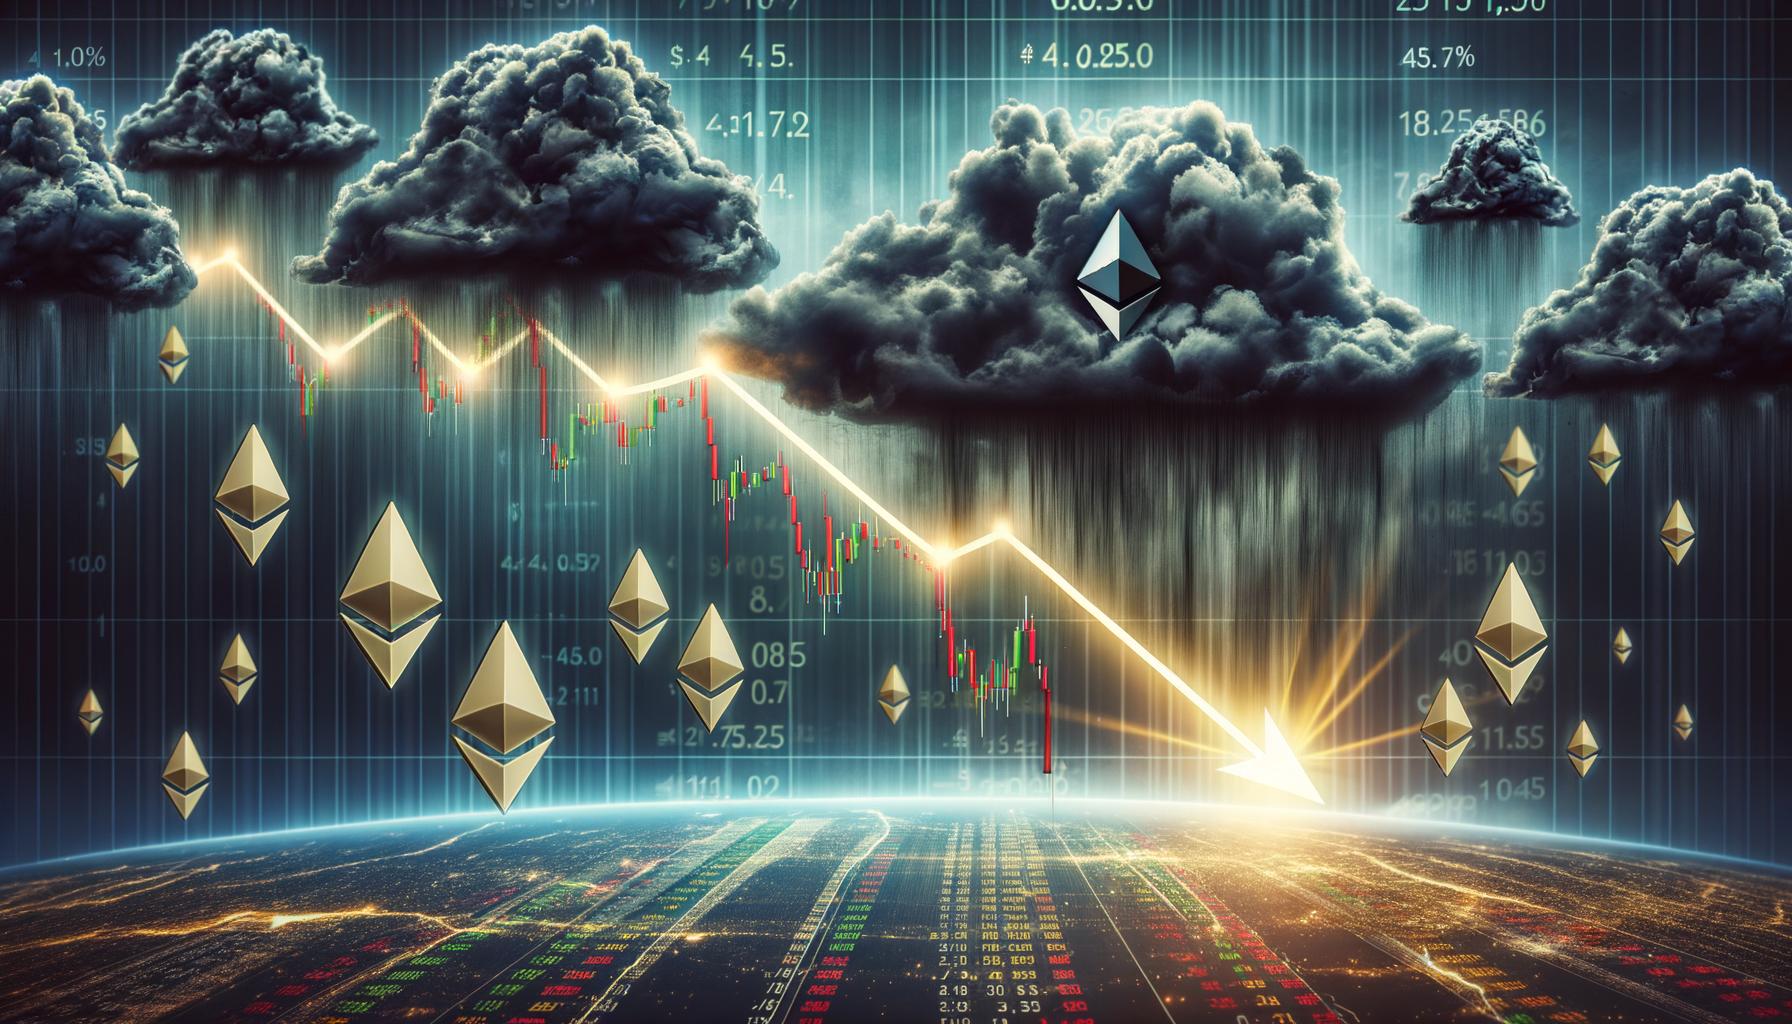 Ethereum price failed to clear the $3,520 zone and started a fresh decline. ETH dived below the $3,250 support and even tested the $3,150 zone. Ethereum started a fresh decline below the $3,320 and $3,250 levels. The price is trading below $3,250 and the 100-hourly Simple Moving Average. There is a key bearish trend line forming with resistance near $3,325 on the hourly chart of ETH/USD (data feed via Kraken). The pair could correct losses, but upsides might be limited above the $3,320 zone. Ethereum Price Takes Hit Ethereum price failed to continue higher above the $3,450 and $3,420 resistance levels. ETH started another decline below the $3,320 support zone like Bitcoin. There was a move below the $3,250 and $3,220 support levels. The price declined 5% and even tested the $3,150 support. A low was formed at $3,156 and the price is now consolidating losses. There was a move above the $3,200 resistance level. The price is now testing the 23.6% Fib retracement level of the downward move from the $3,426 swing high to the $3,156 low. Ethereum is trading below $3,300 and the 100-hourly Simple Moving Average. If there is a recovery wave, the price might face resistance near the $3,250 level. The first major resistance is near the $3,300 level or the 50% Fib retracement level of the downward move from the $3,426 swing high to the $3,156 low. There is also a key bearish trend line forming with resistance near $3,325 on the hourly chart of ETH/USD. The next major hurdle is near the $3,365 level. A close above the $3,365 level might send Ether toward the $3,450 resistance. The next key resistance is near $3,500. An upside break above the $3,500 resistance might send the price higher. Any more gains could send Ether toward the $3,550 resistance zone. Another Decline In ETH? If Ethereum fails to clear the $3,320 resistance, it could continue to move down. Initial support on the downside is near $3,200. The first major support sits near the $3,150 zone. A clear move below the $3,150 support might push the price toward $3,080. Any more losses might send the price toward the $3,050 level in the near term. Technical Indicators Hourly MACD – The MACD for ETH/USD is gaining momentum in the bearish zone. Hourly RSI – The RSI for ETH/USD is now below the 50 zone. Major Support Level – $3,150 Major Resistance Level – $3,320